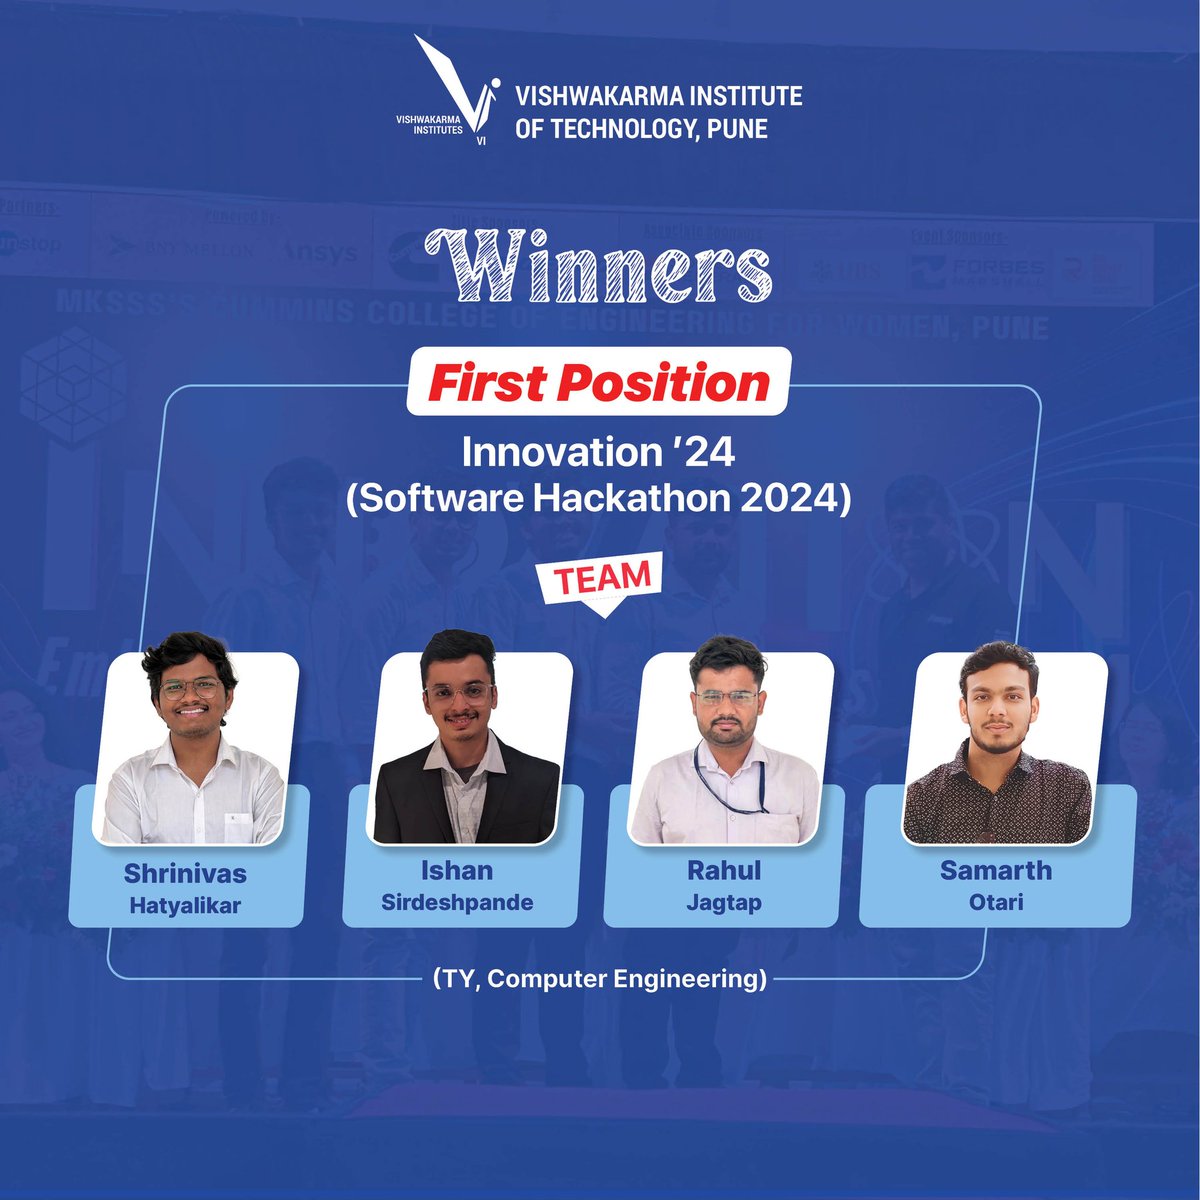 Congratulations to the winners of the First Position in Innovation ’24 (Software Hackathon 2024) 
#Innovation24 #HackathonWinners #SoftwareHackathon #TechInnovation #FirstPlace #CodingExcellence #TeamworkWins #FutureTechLeaders #engineeringinstitute #engineeringcollege